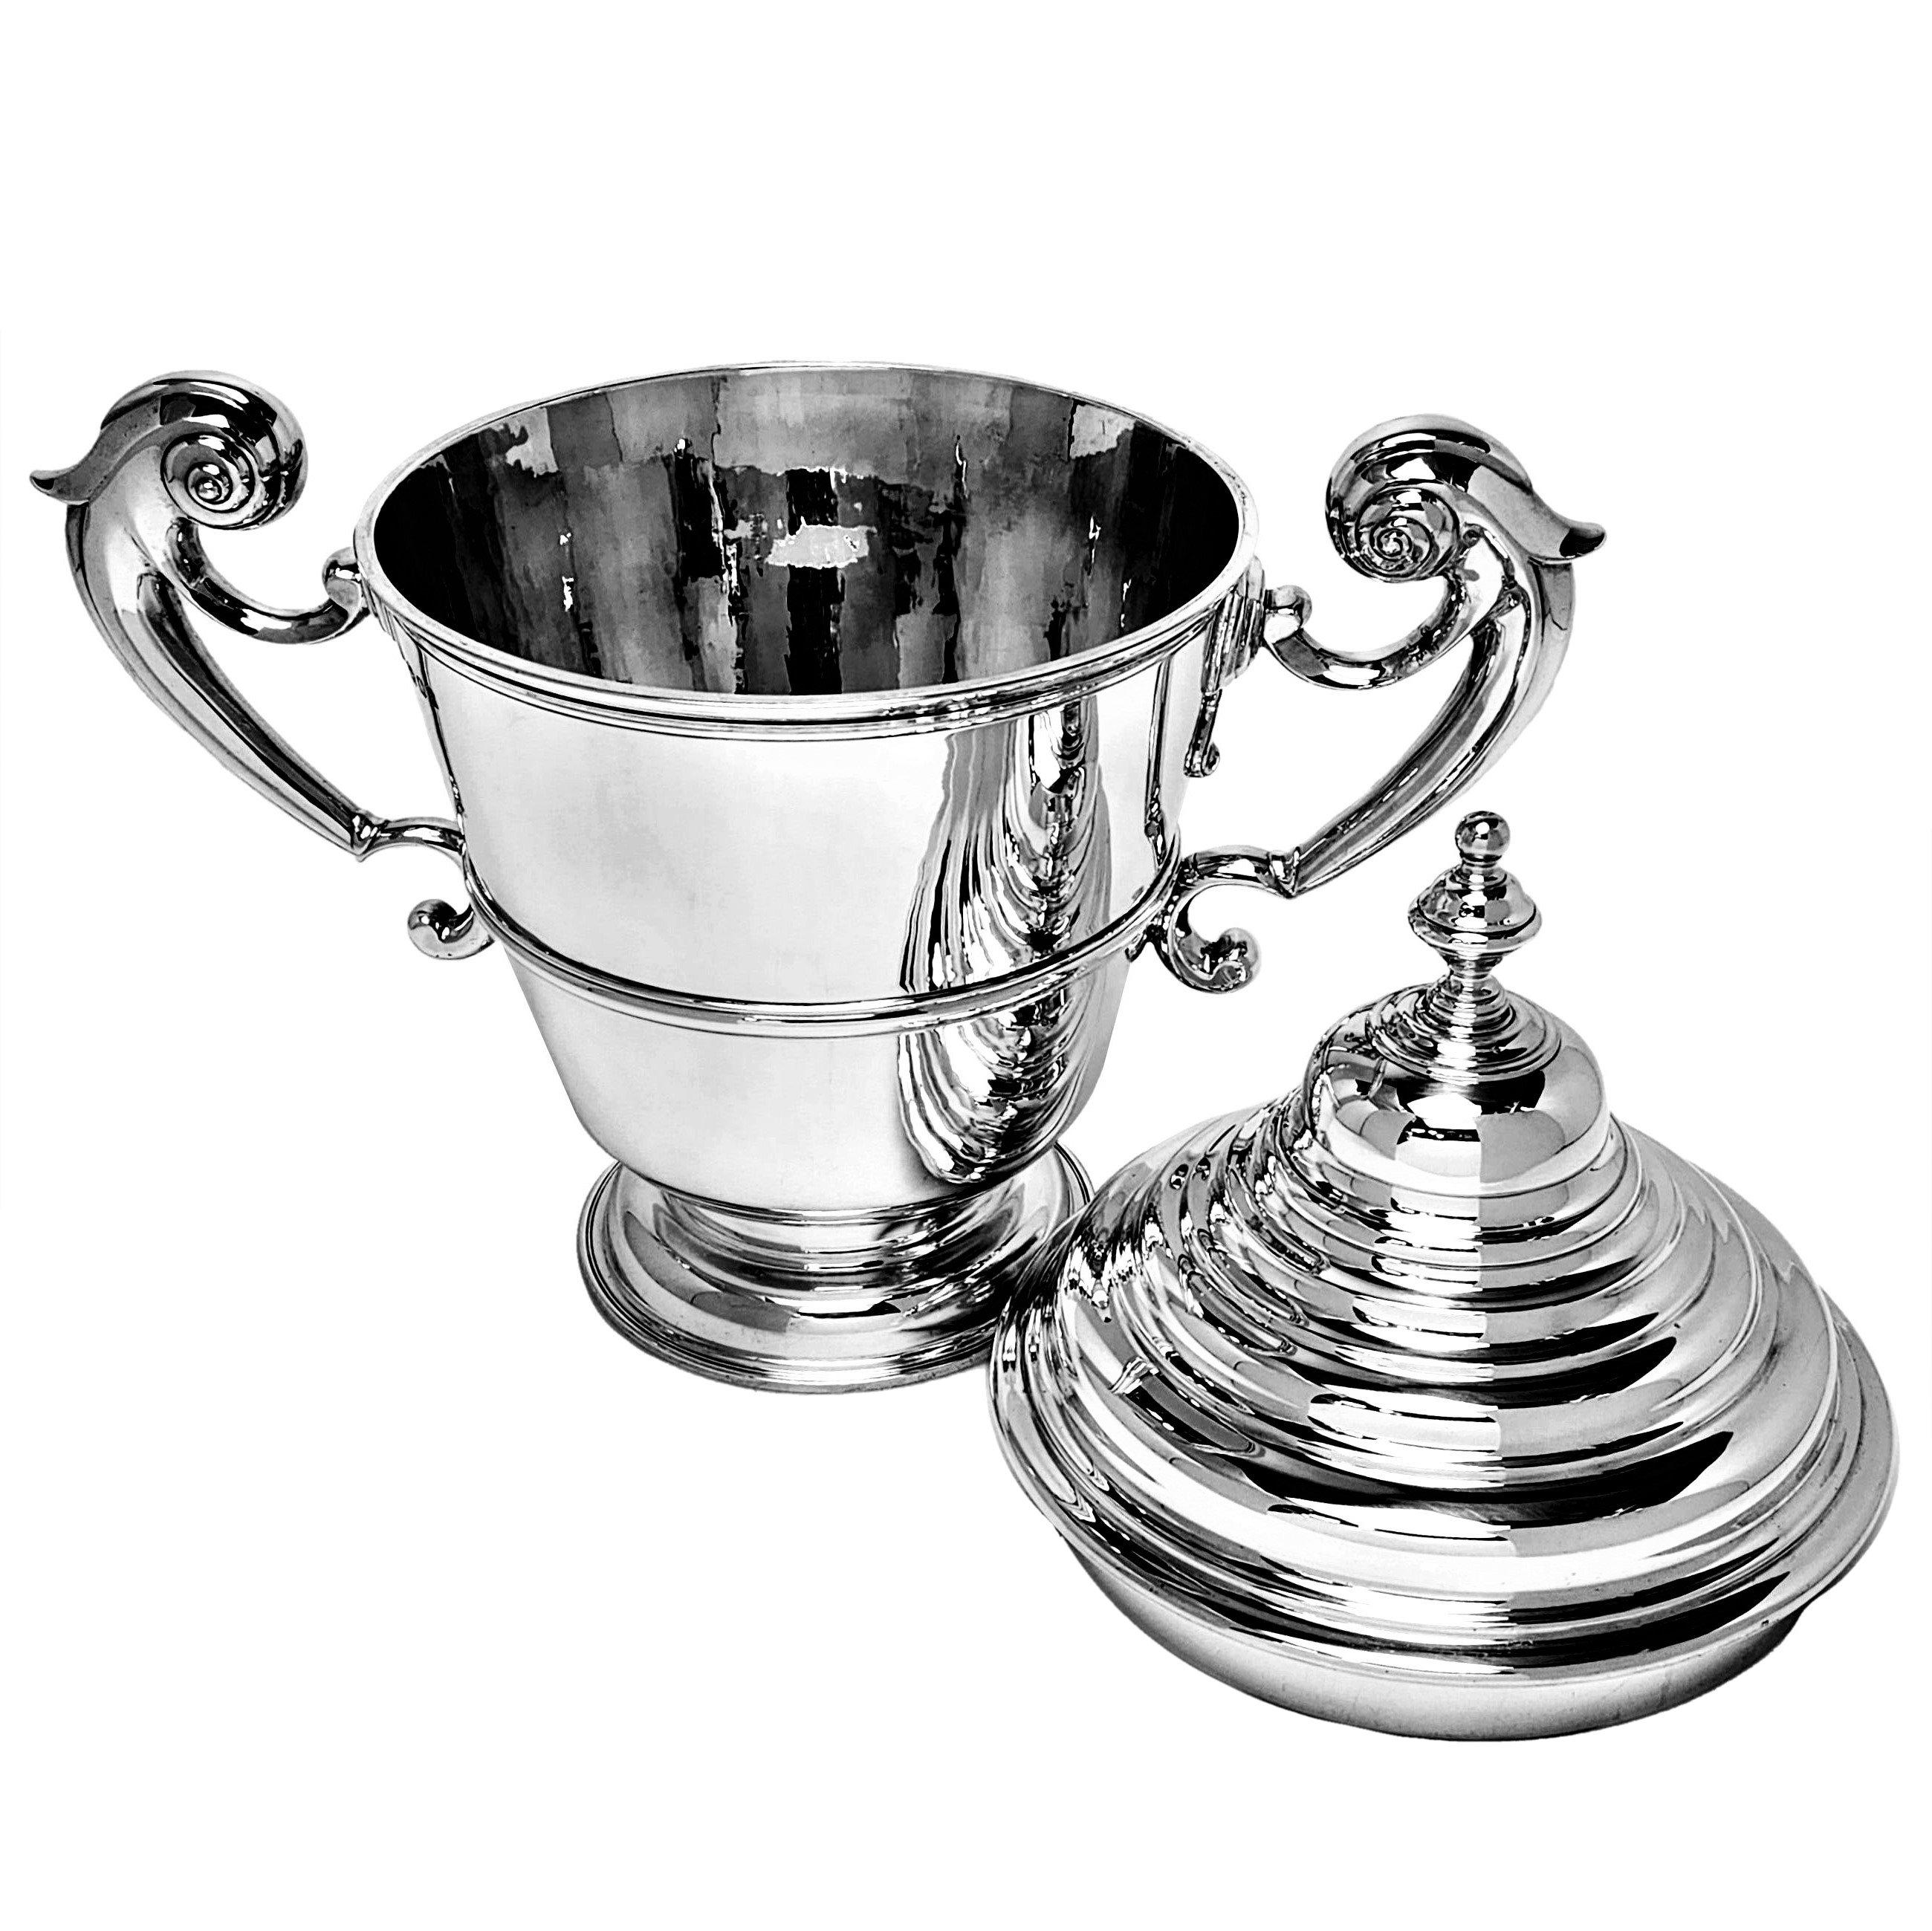 An impressive solid Silver Lidded Cup and Cover with two substantial silver scroll handles and a tall domed lid. The Trophy has a polished exterior and is suitable for engraving if desired. This Two Handled Cup is perfect as an impressive prize or